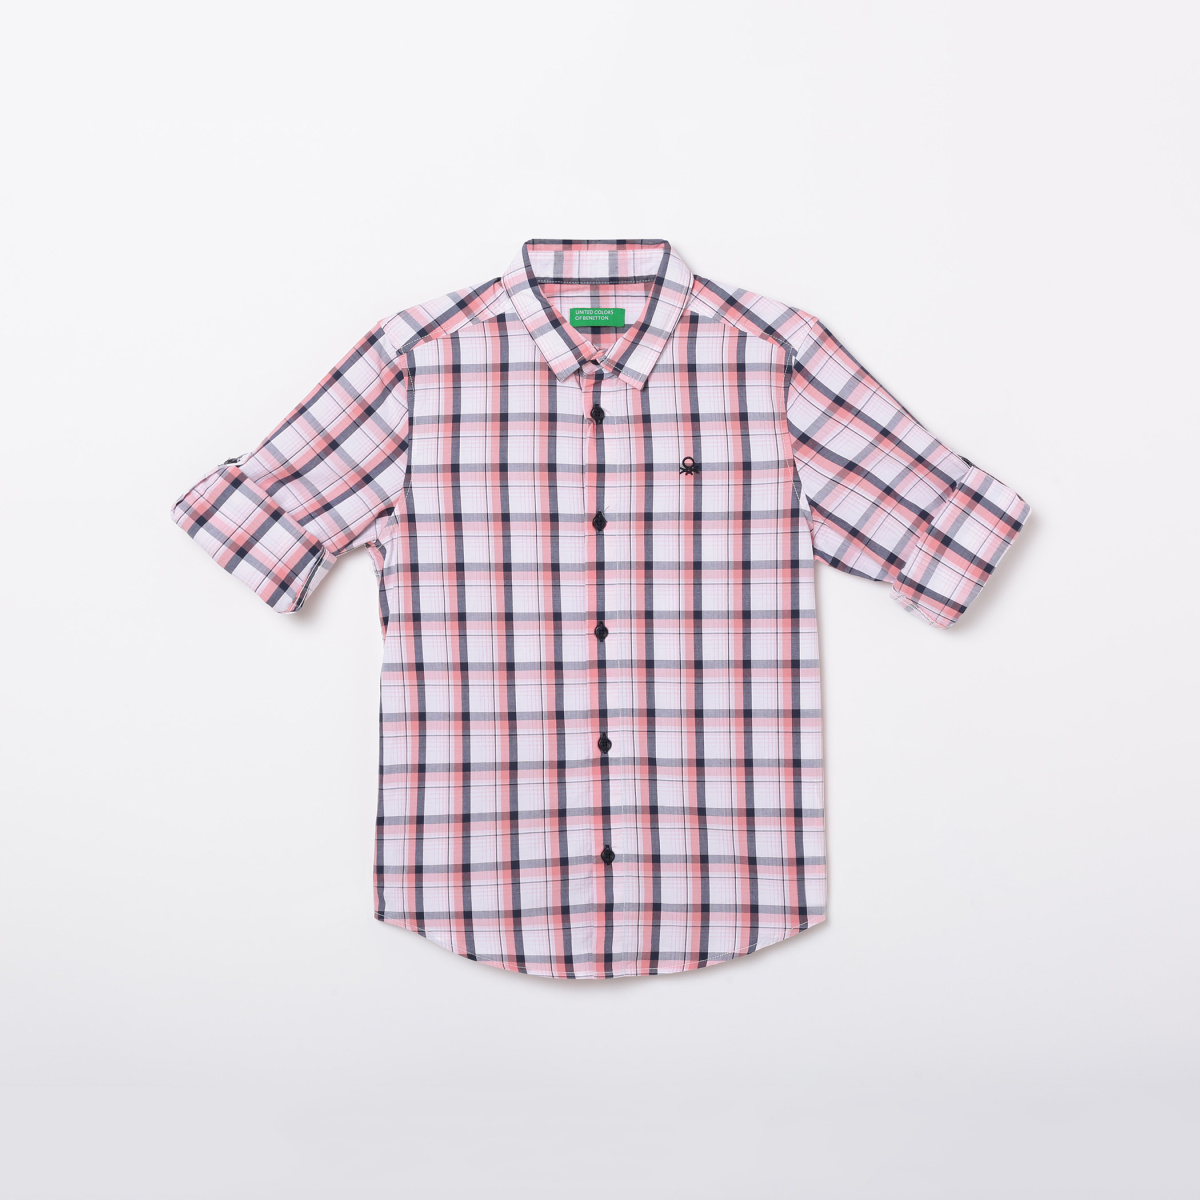 UNITED COLORS OF BENETTON Boys Checked Full Sleeves Casual Shirt